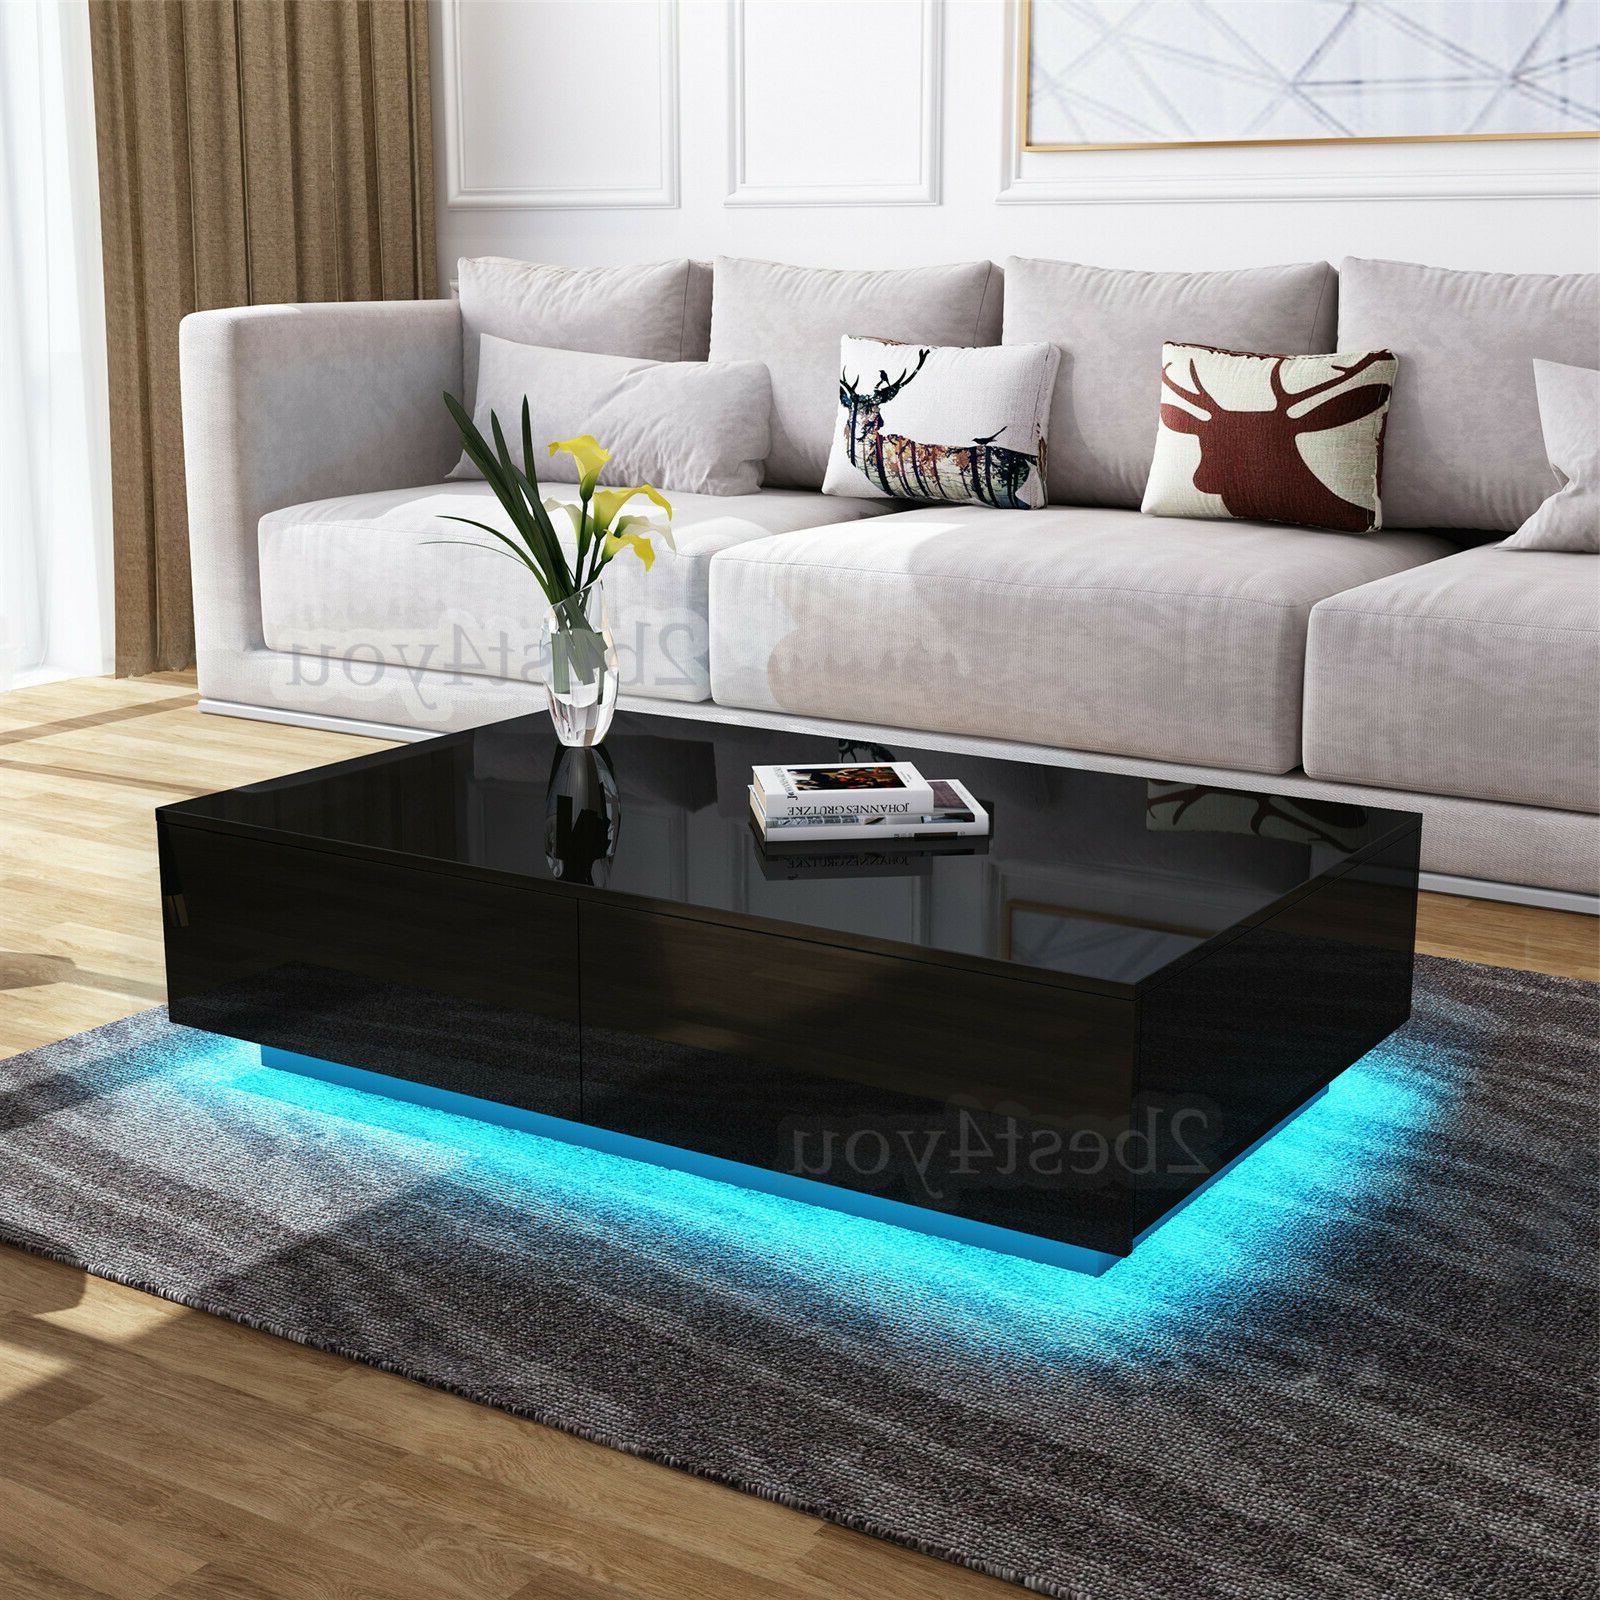 2020 Modern Coffee Table With Led Lights – Stellabracy With Coffee Tables With Drawers And Led Lights (View 4 of 15)